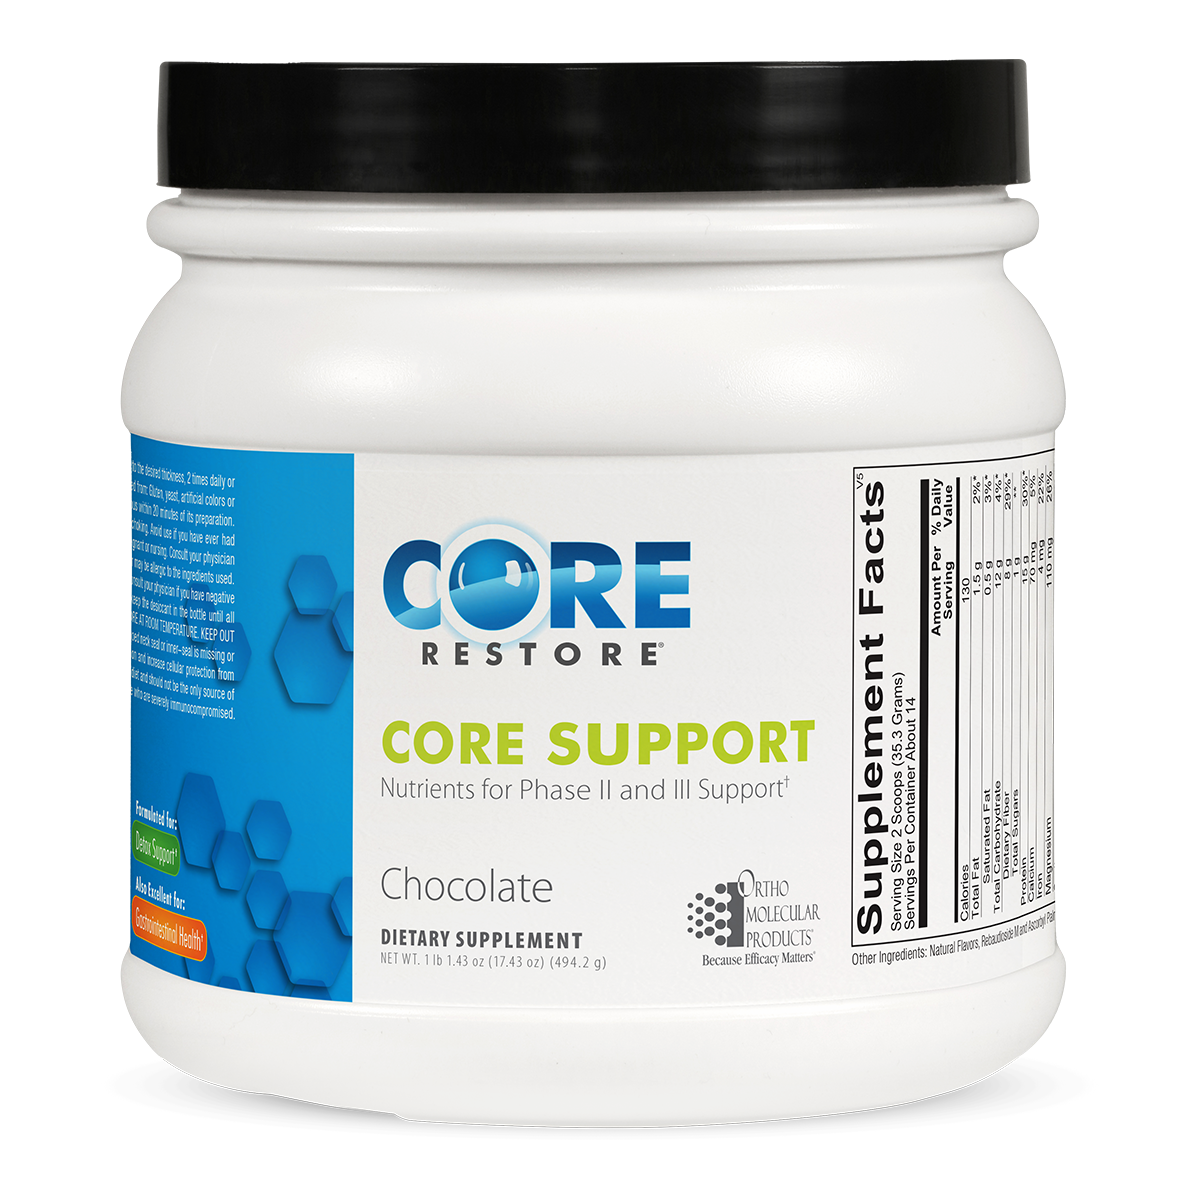 https://www.orthomolecularproducts.com/images/default-source/products/681-coresupport-chocolate.png?sfvrsn=99afb5b4_5